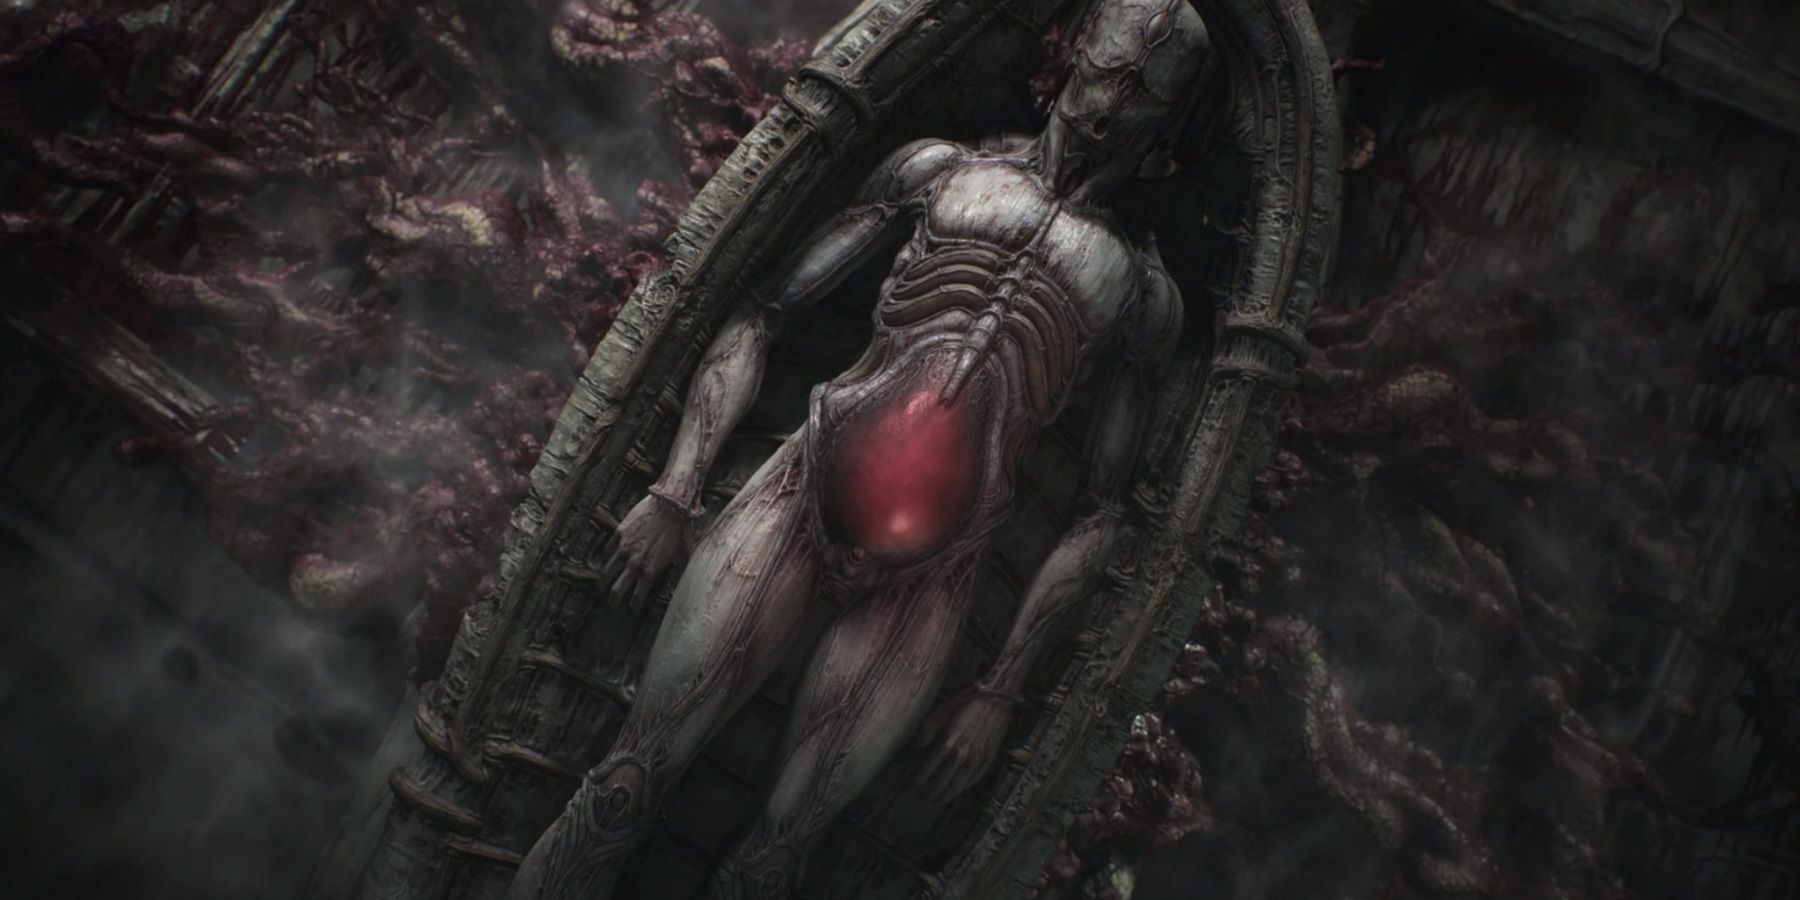 An image from the horror game Scorn showing a horrifying humanoid creature with a glowing red belly.